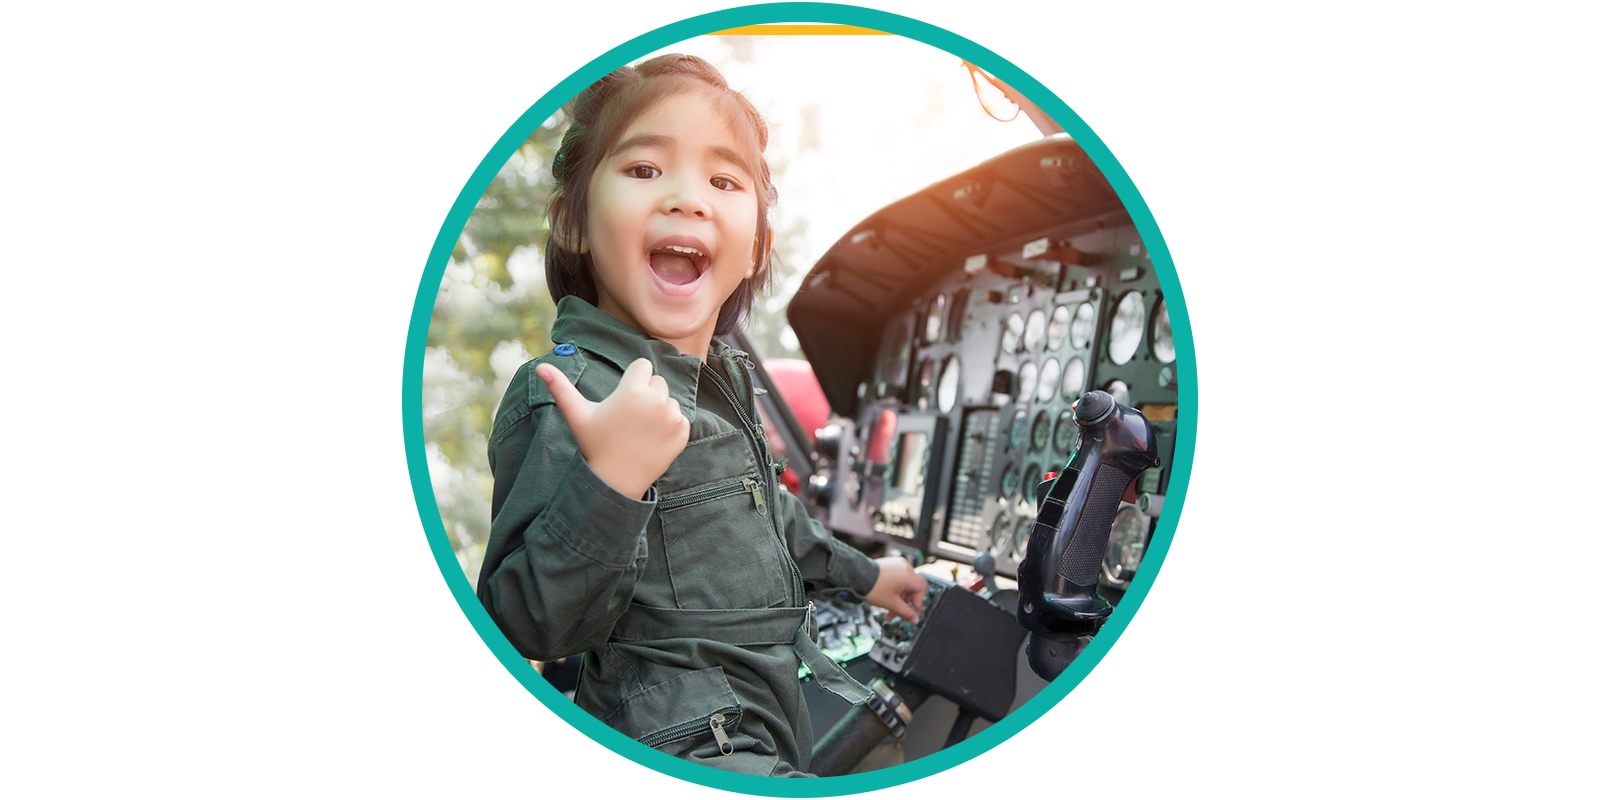 Young child with thumb up in airplain cockpit